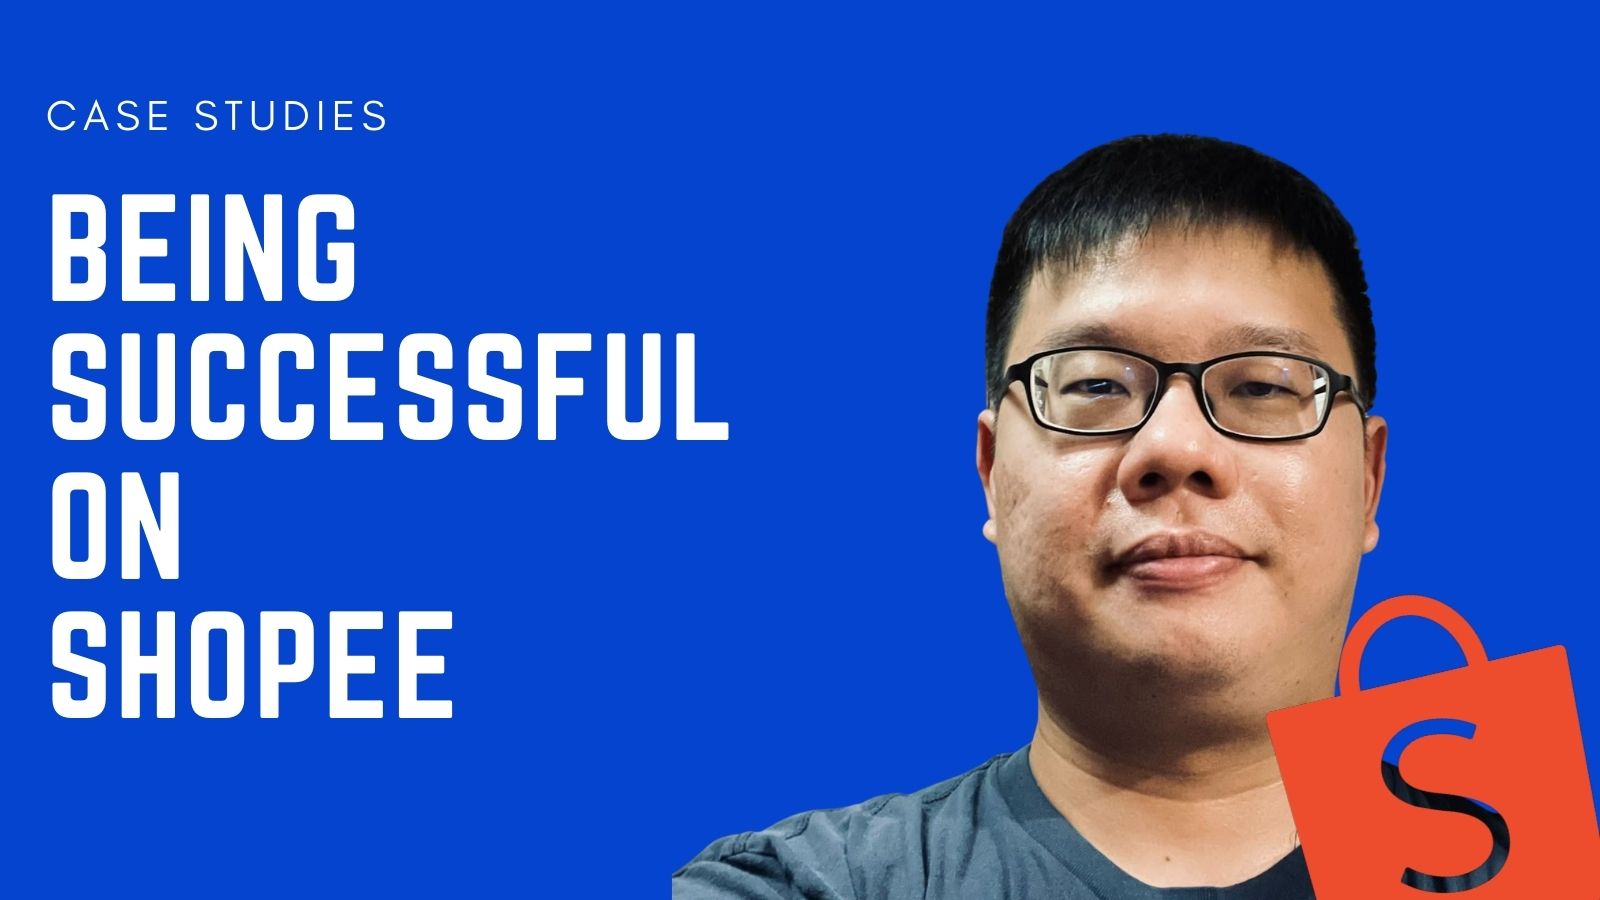 Meet James, shopee seller in Singapore making a six figure income